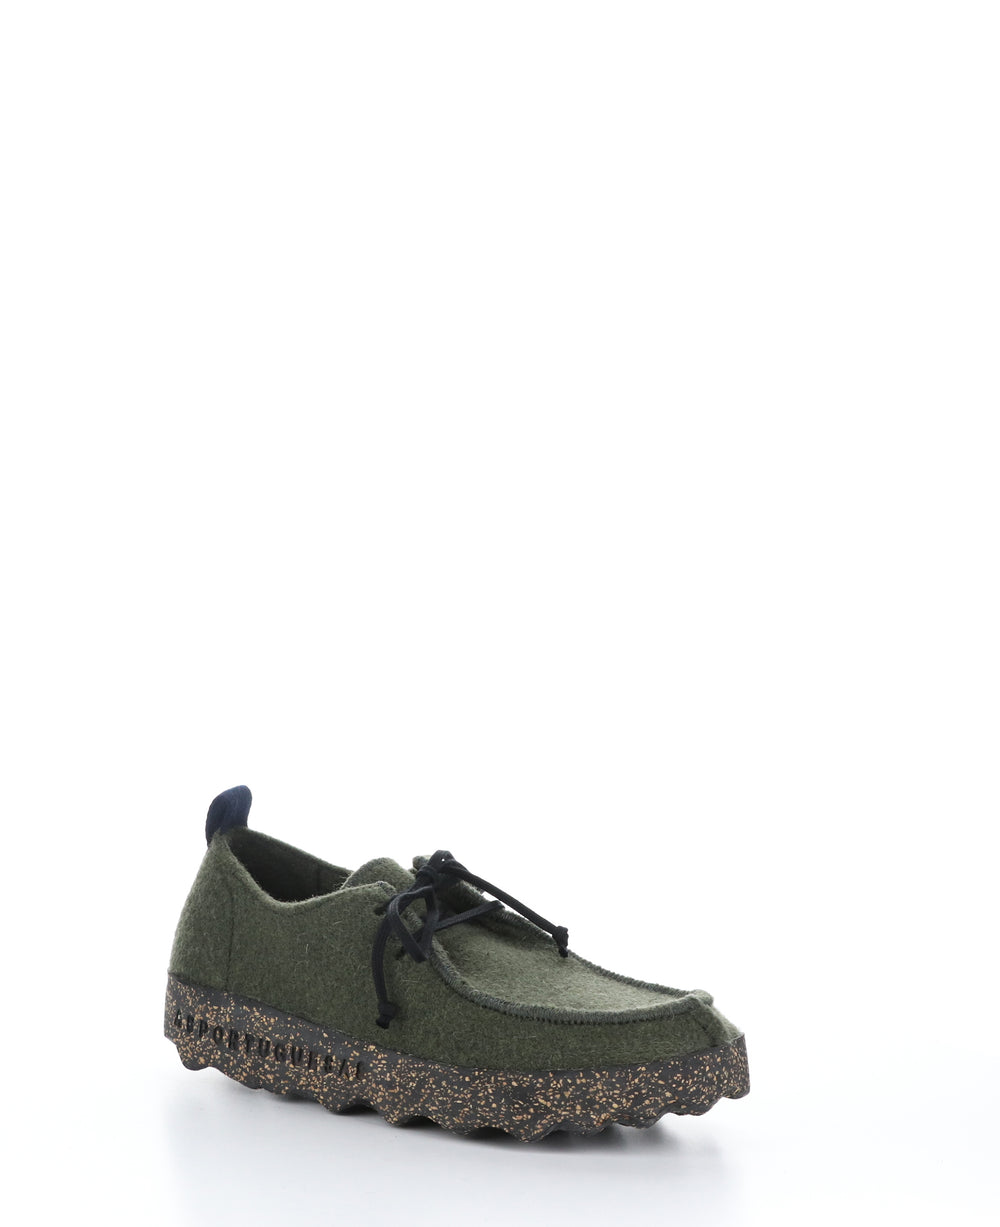 CHAT063ASP Military Green Round Toe Shoes|CHAT063ASP Chaussures à Bout Rond in Vert